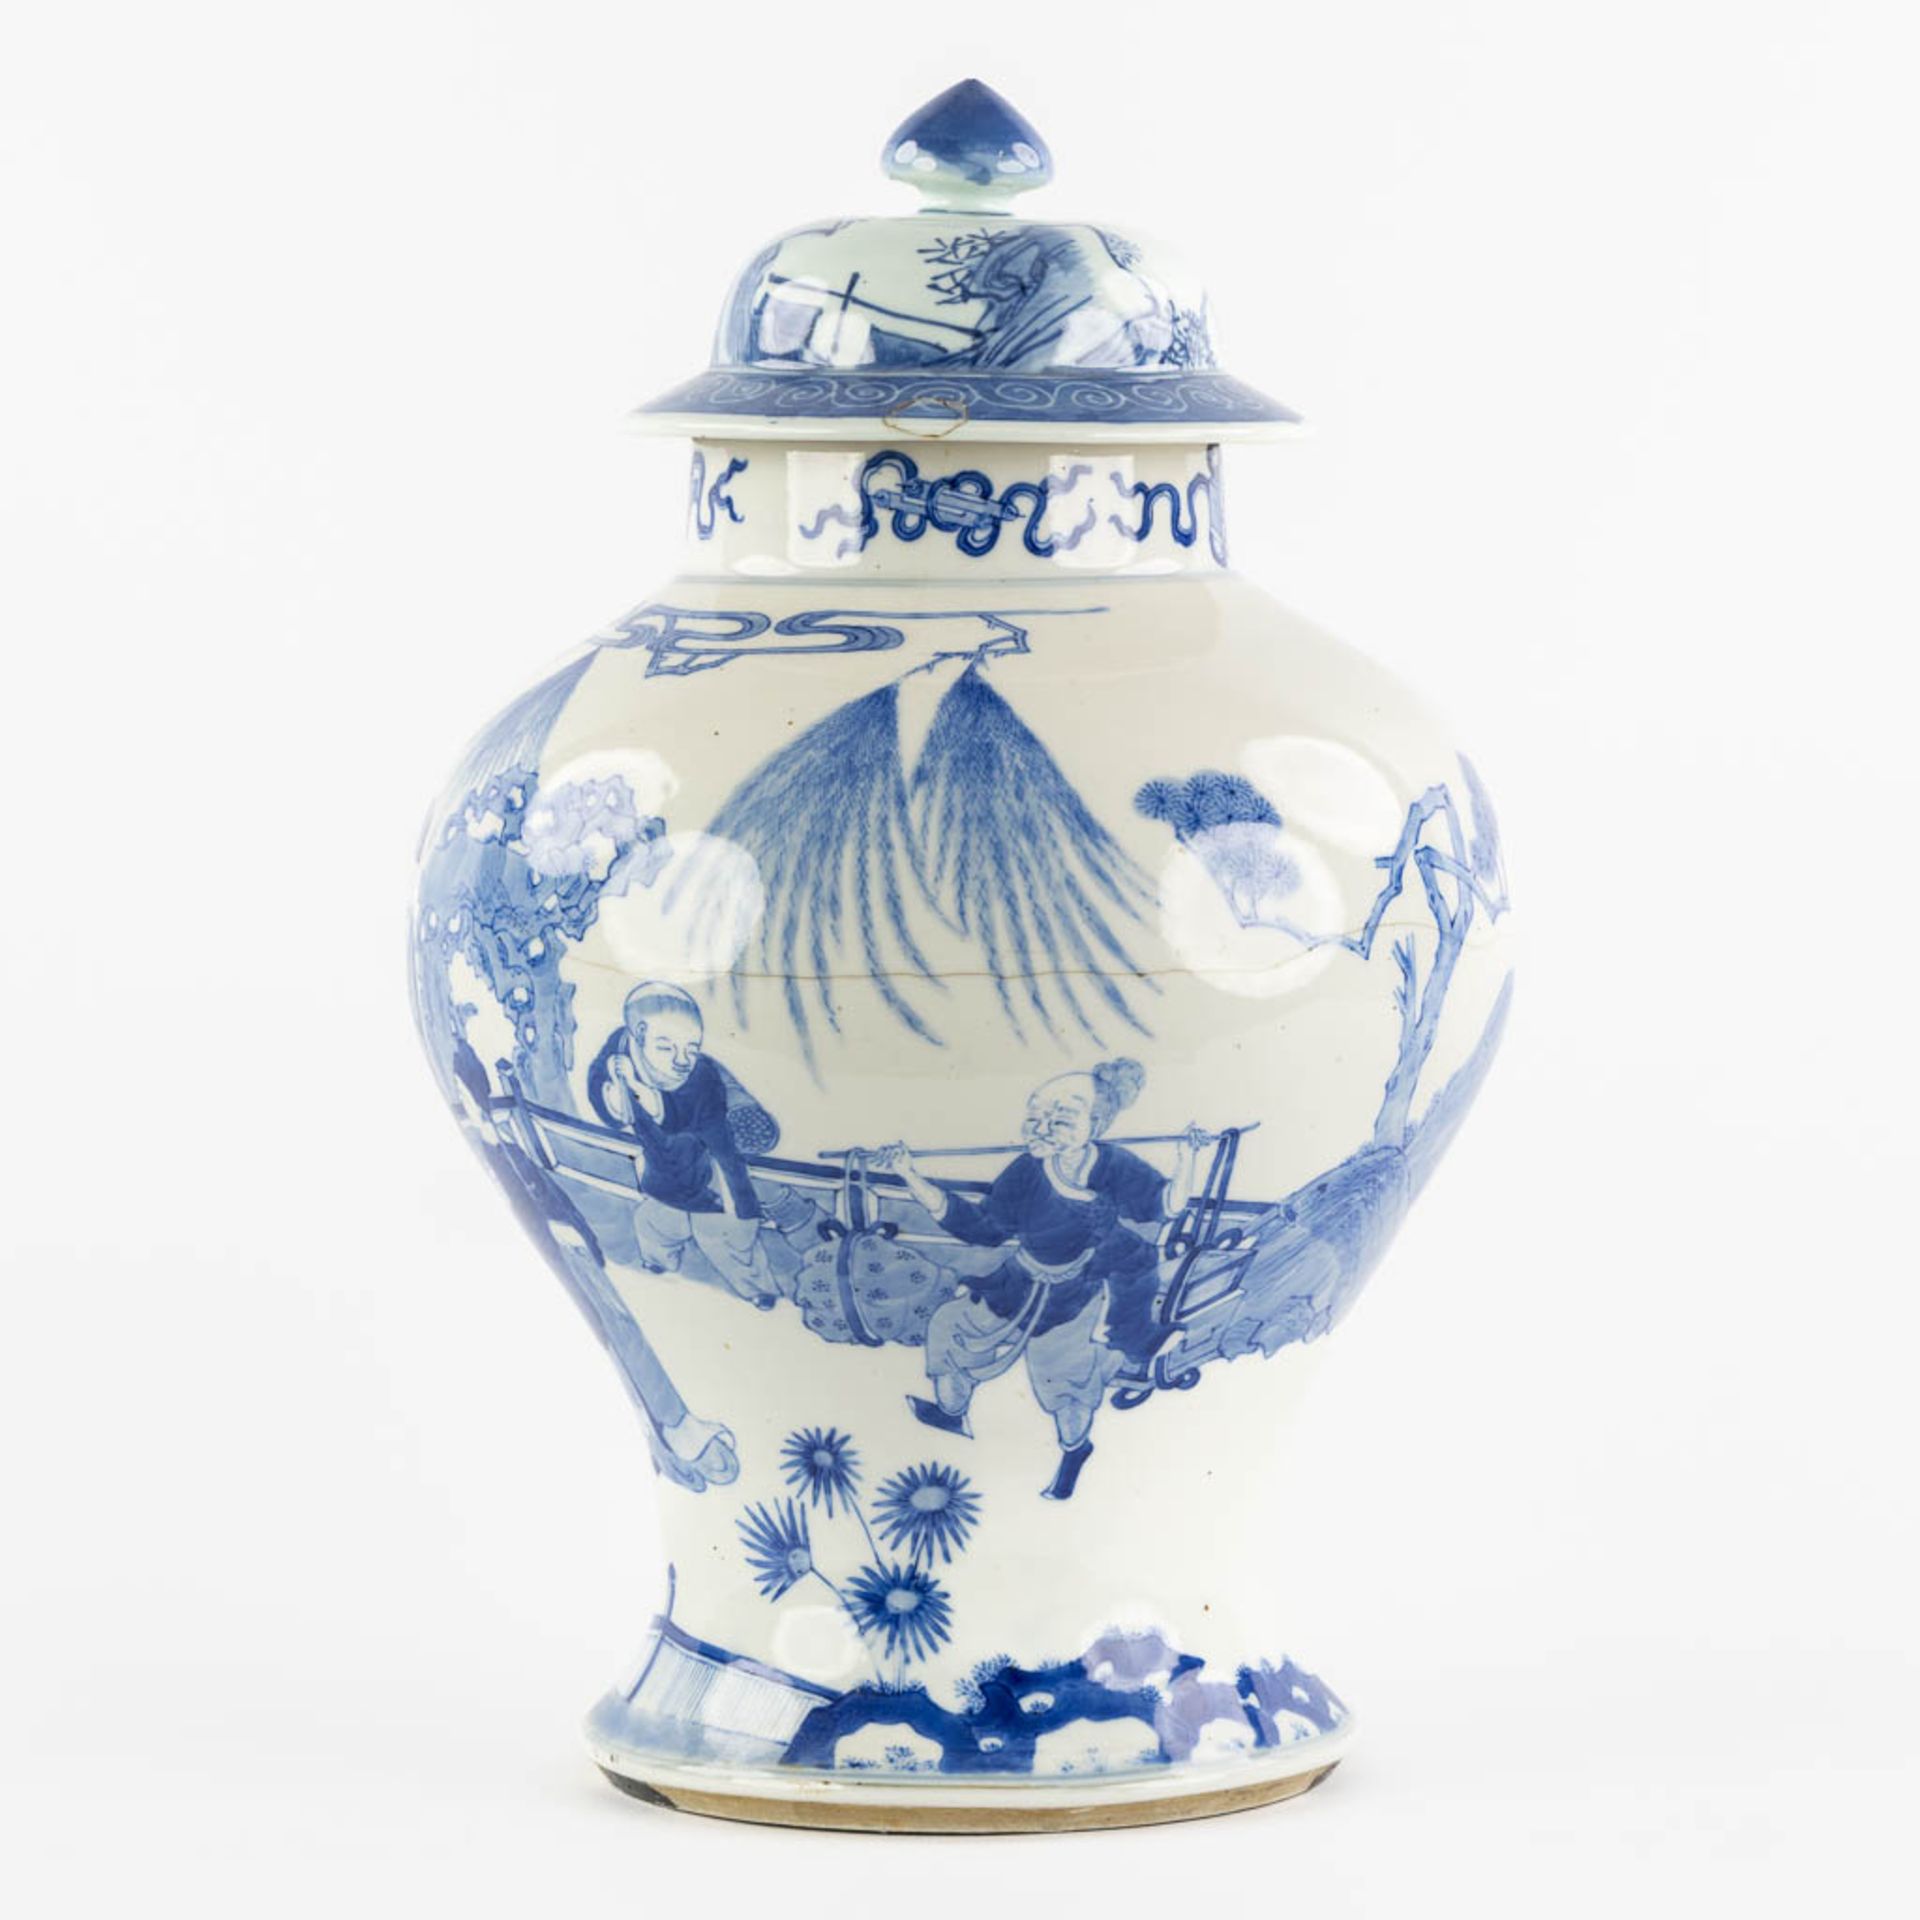 A Chinese 'Baluster' vase, blue-white decor of 'Wise Men'. (H:43 x D:29 cm) - Image 6 of 12